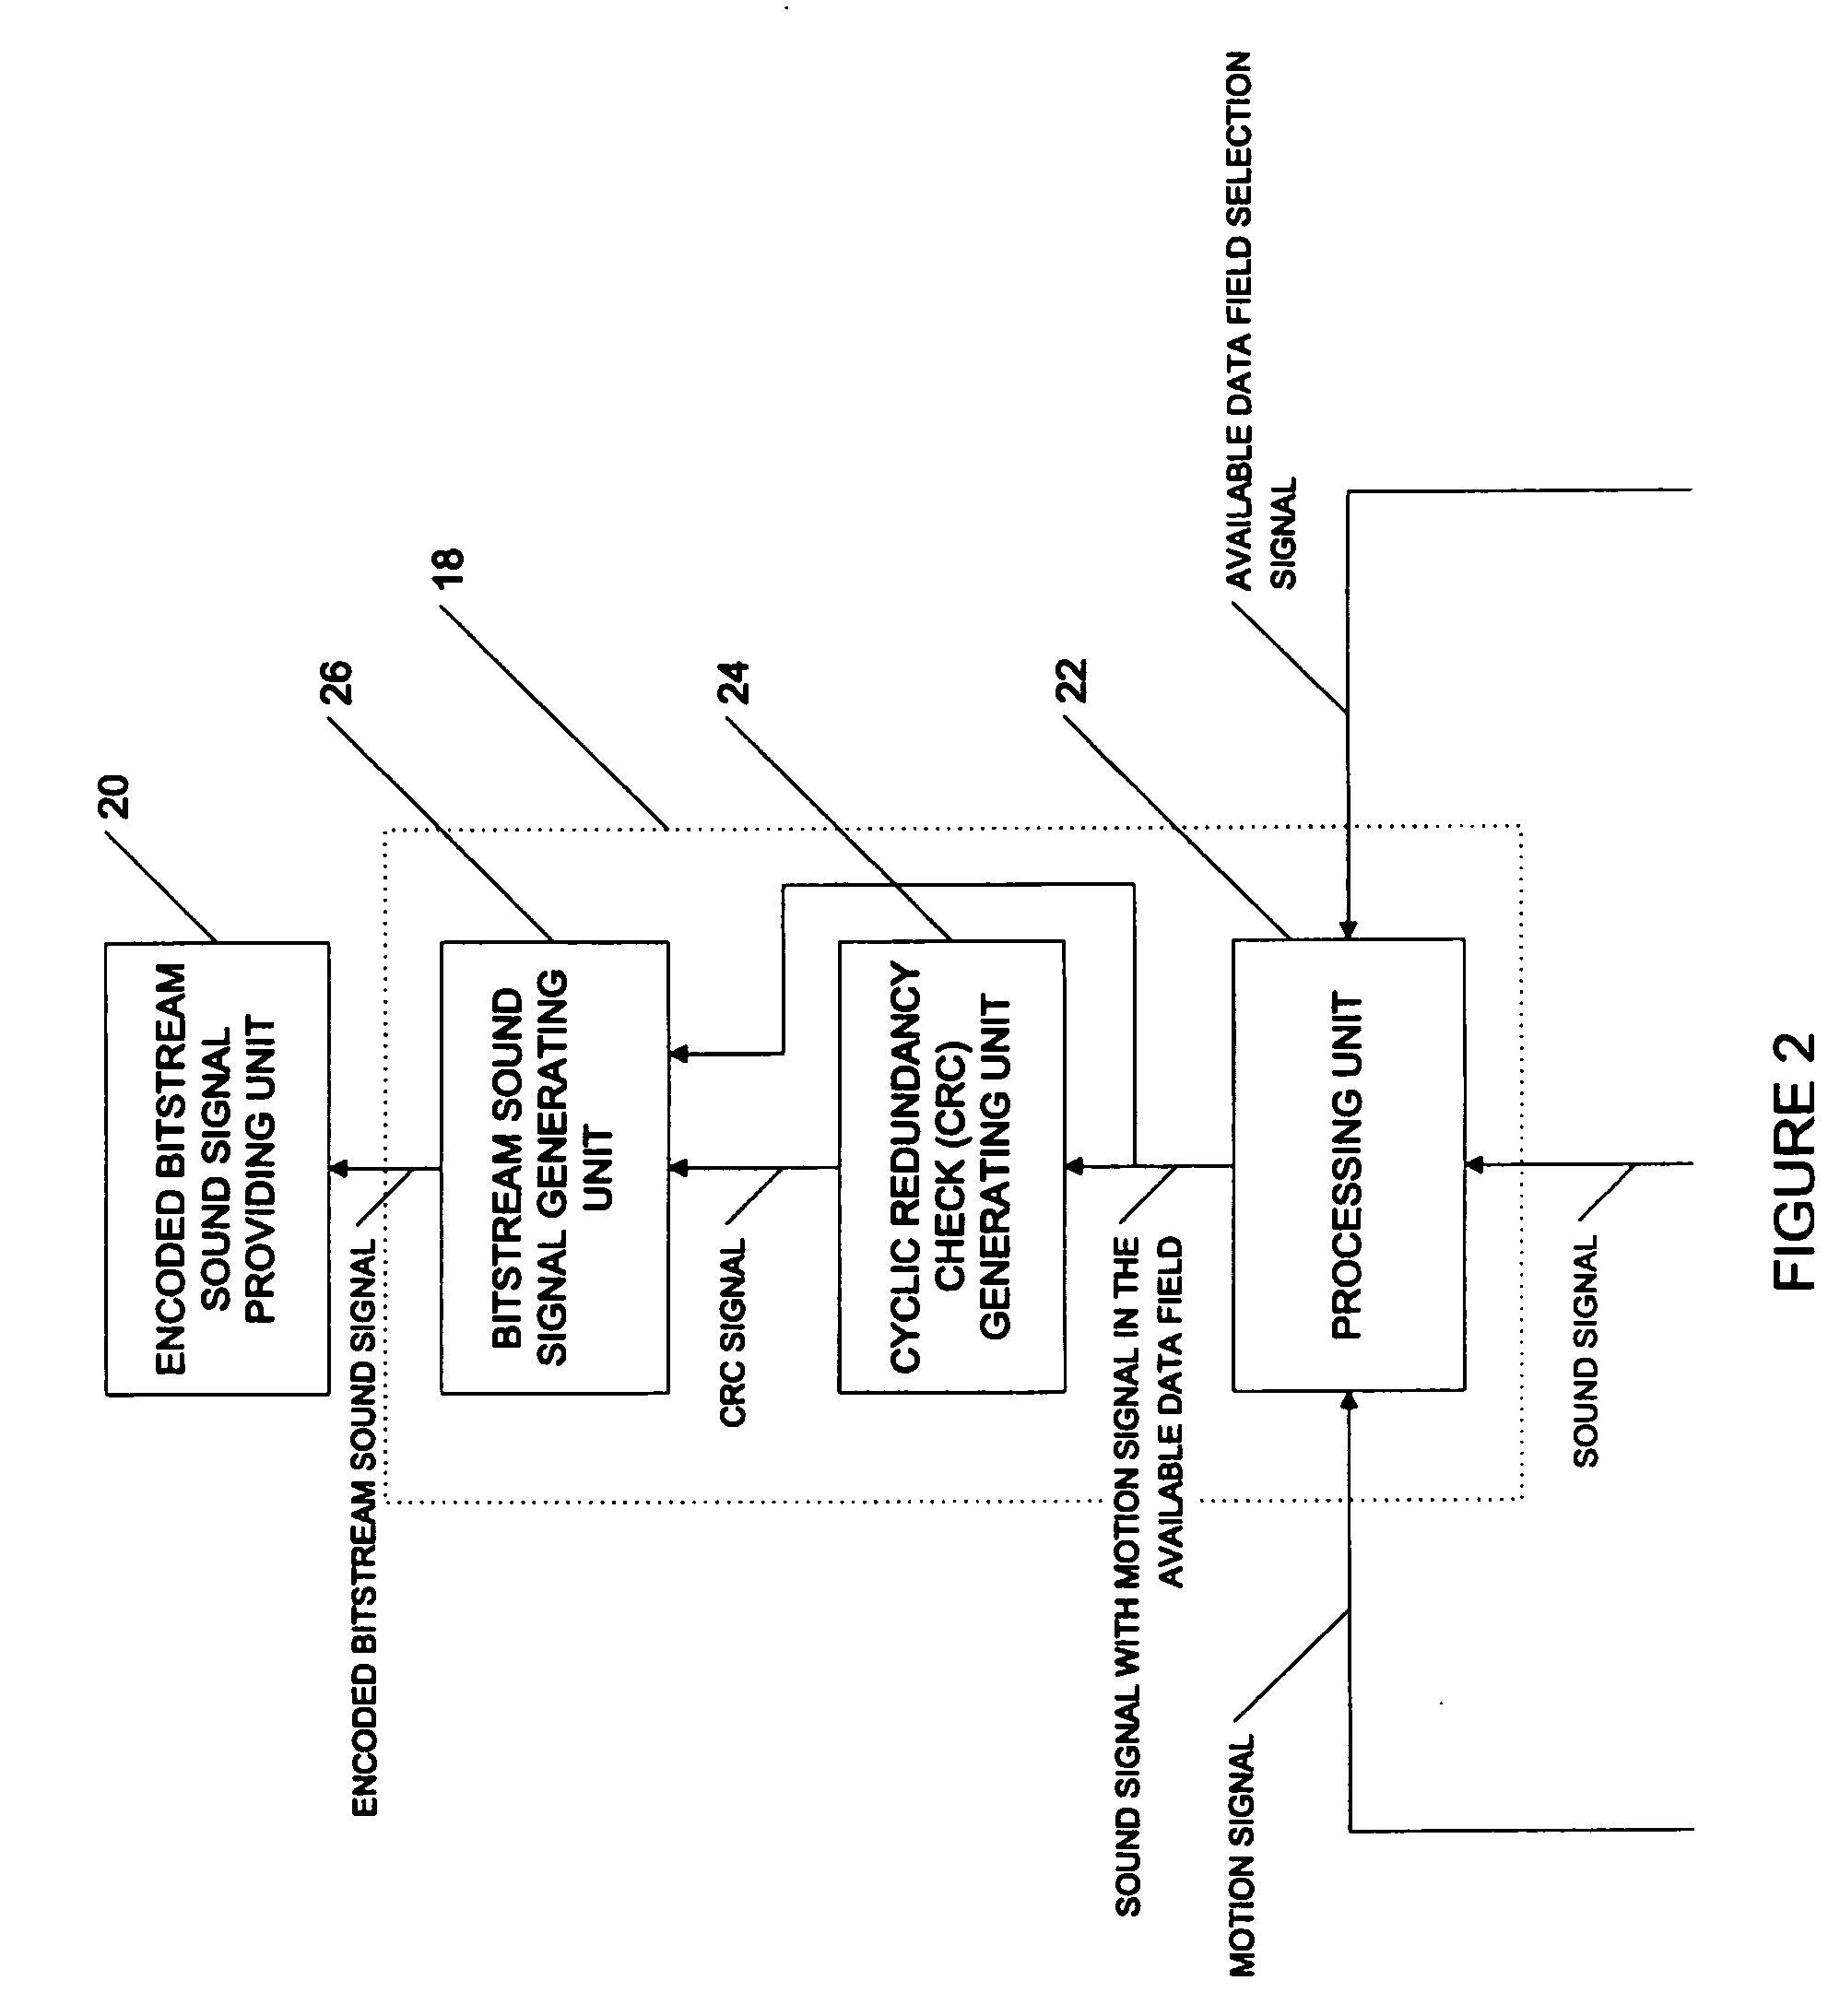 Method and apparatus for providing a motion signal with a sound signal using an existing sound signal encoding format